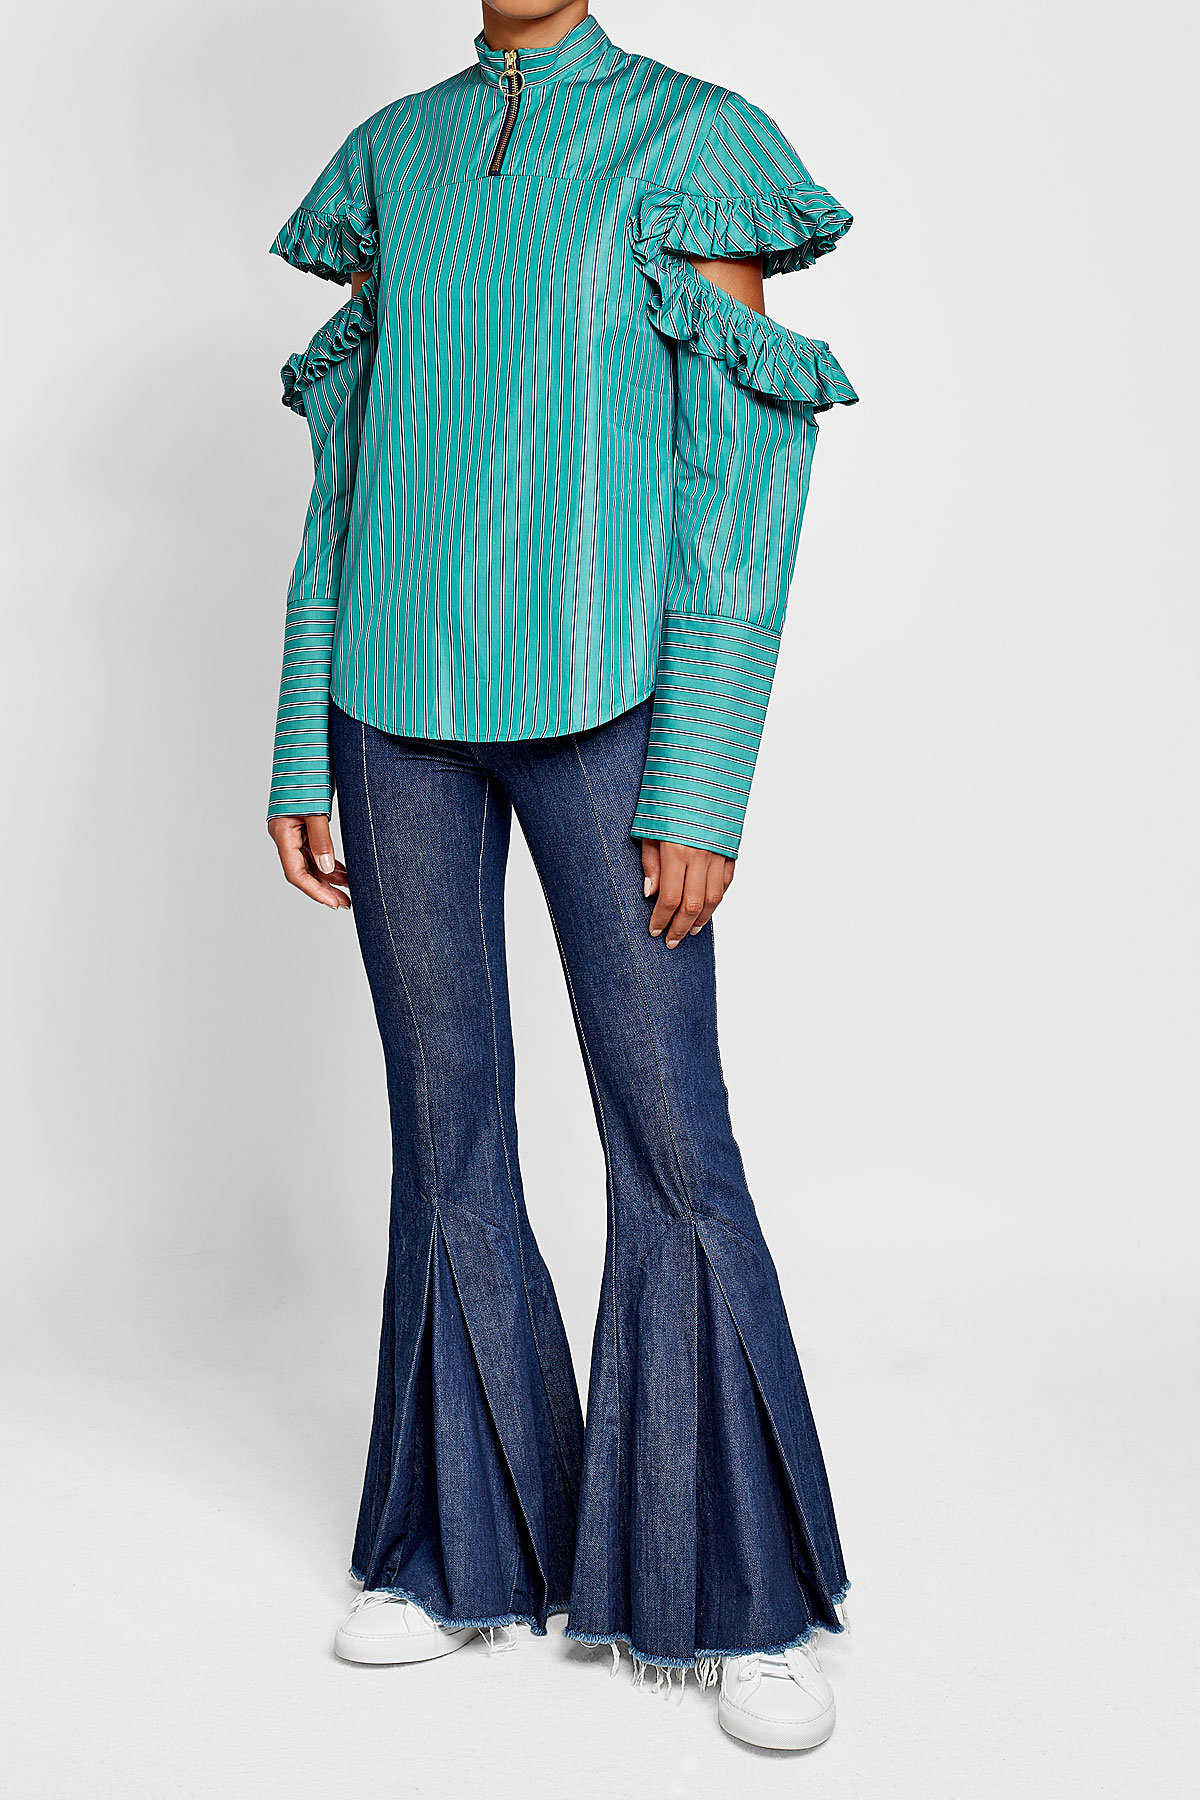 Maggie Cold-Shoulder Cotton Blouse with Ruffles worn with Maggie Marilyn flared jeans - image via Stylebop.com